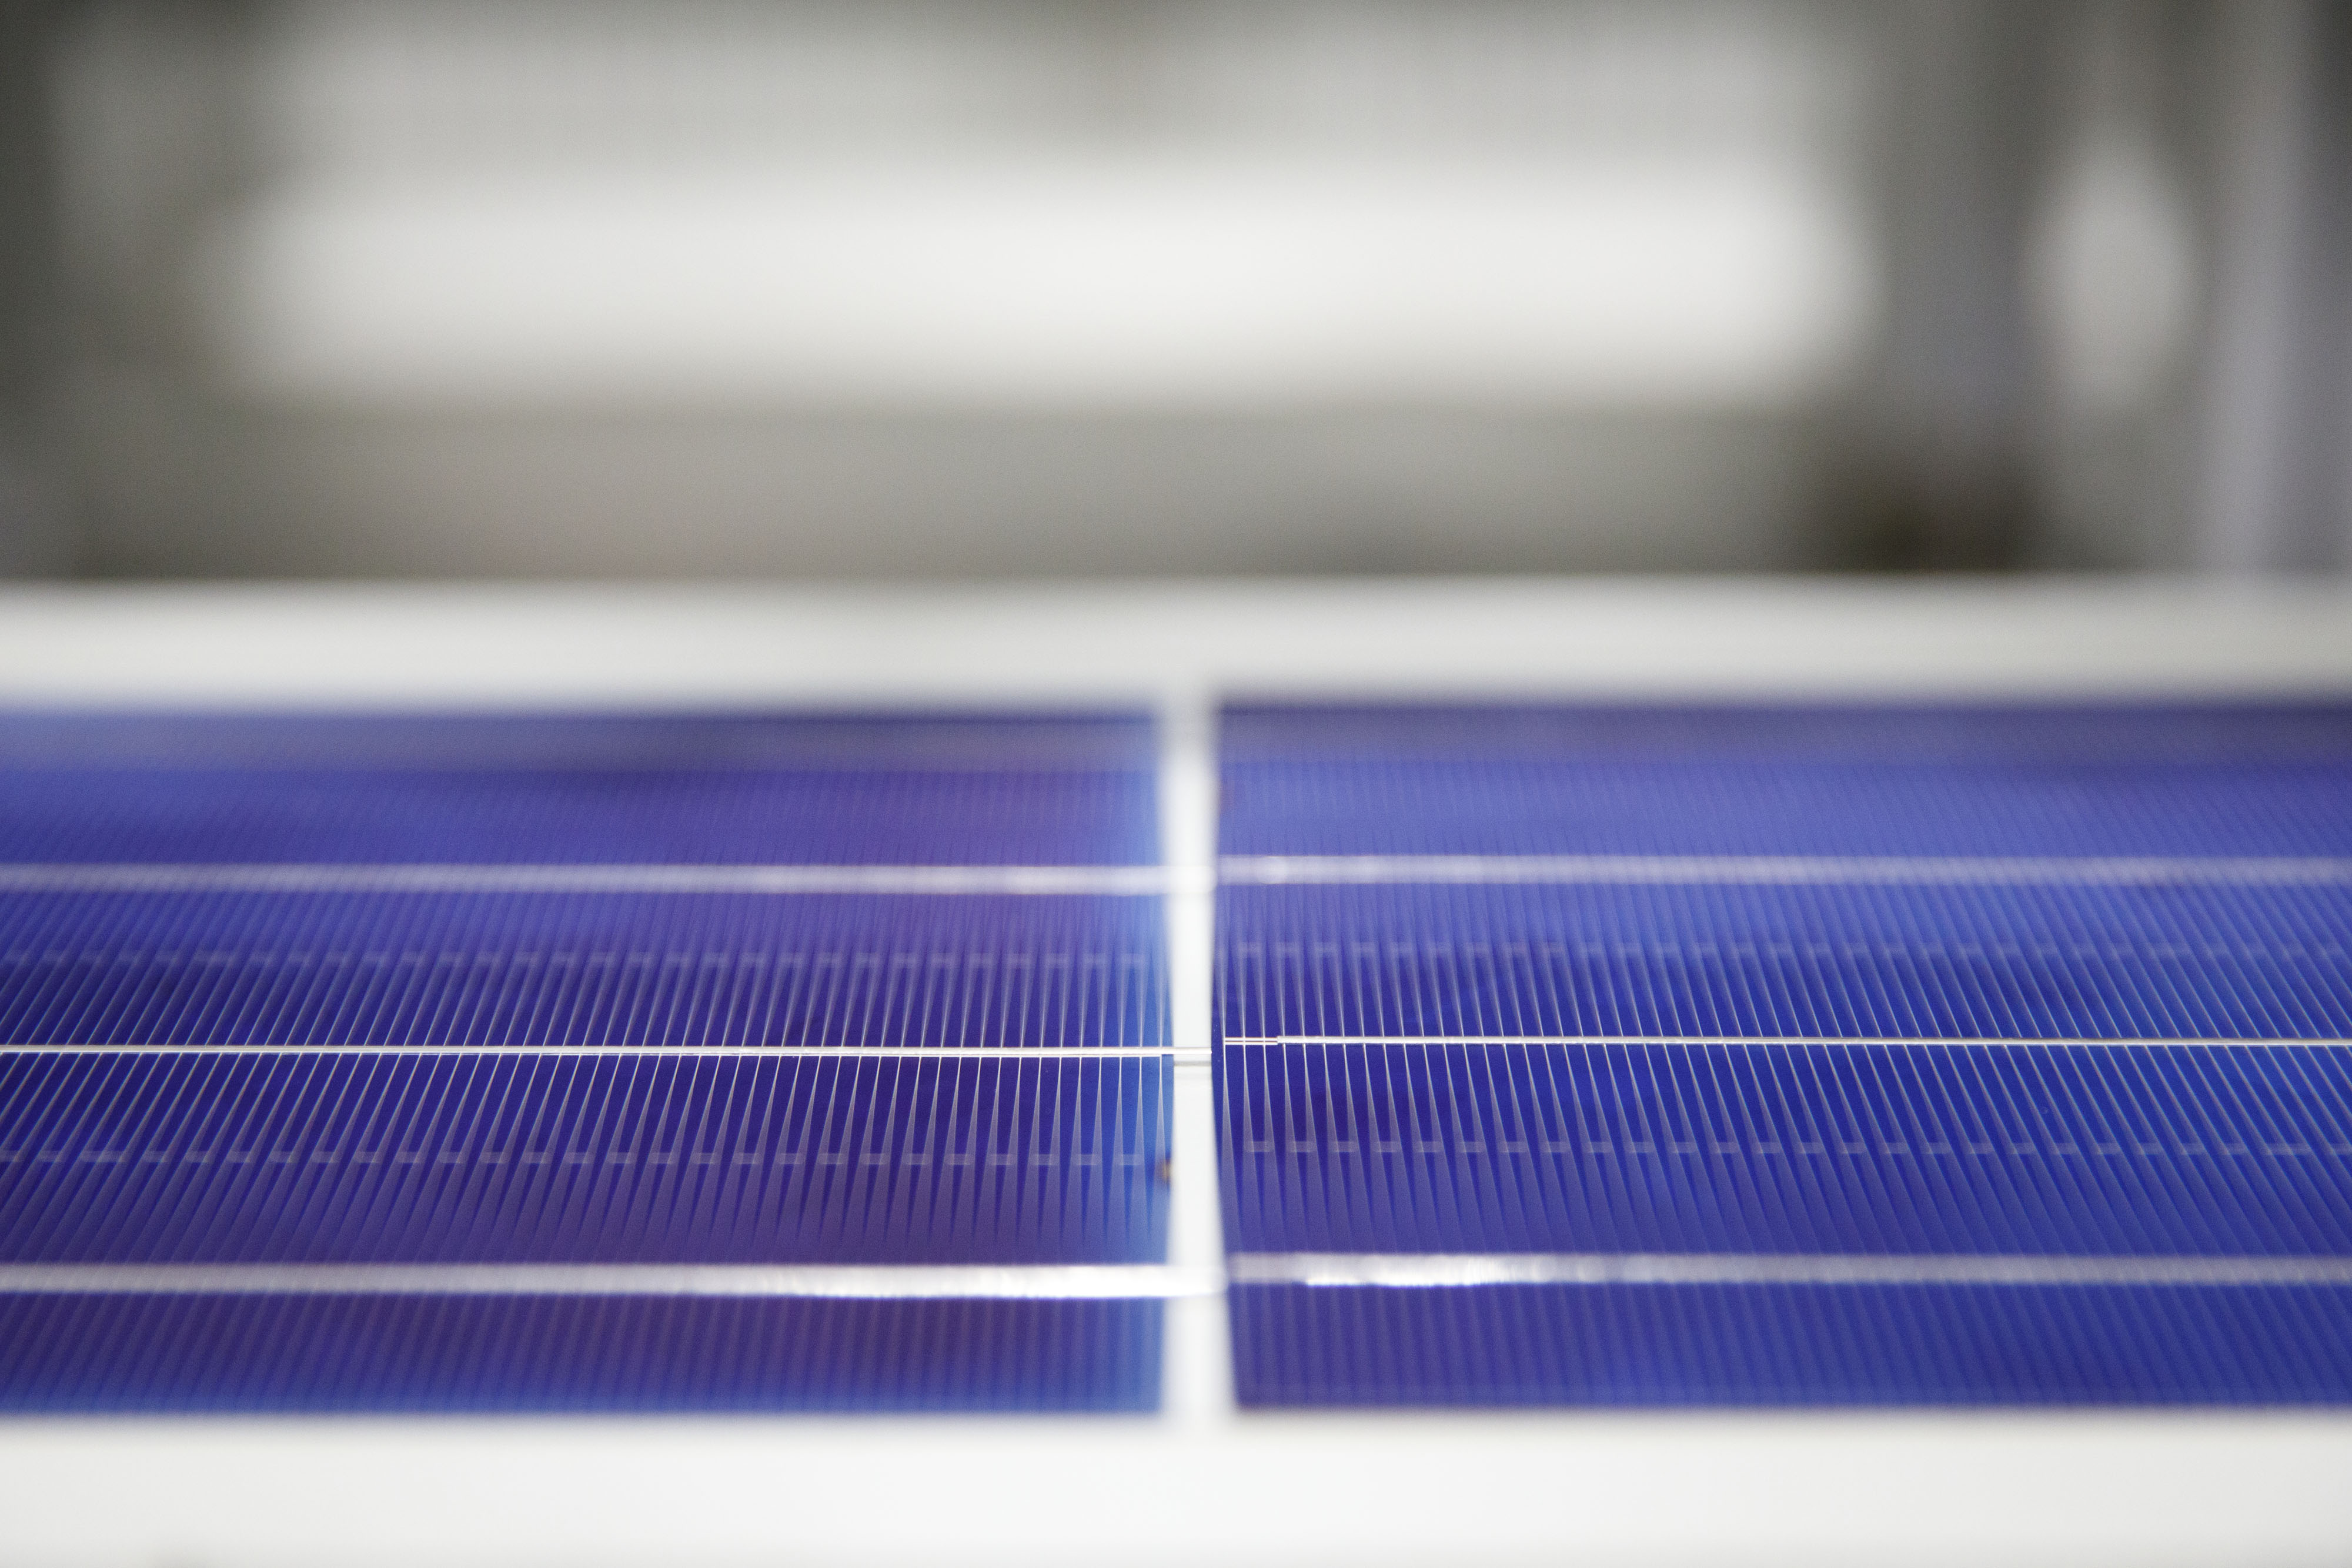 Solar Panel Manufacturing At The SunSpark Technology Inc. Facility As Industry Dodges Bullet On Tariffs 